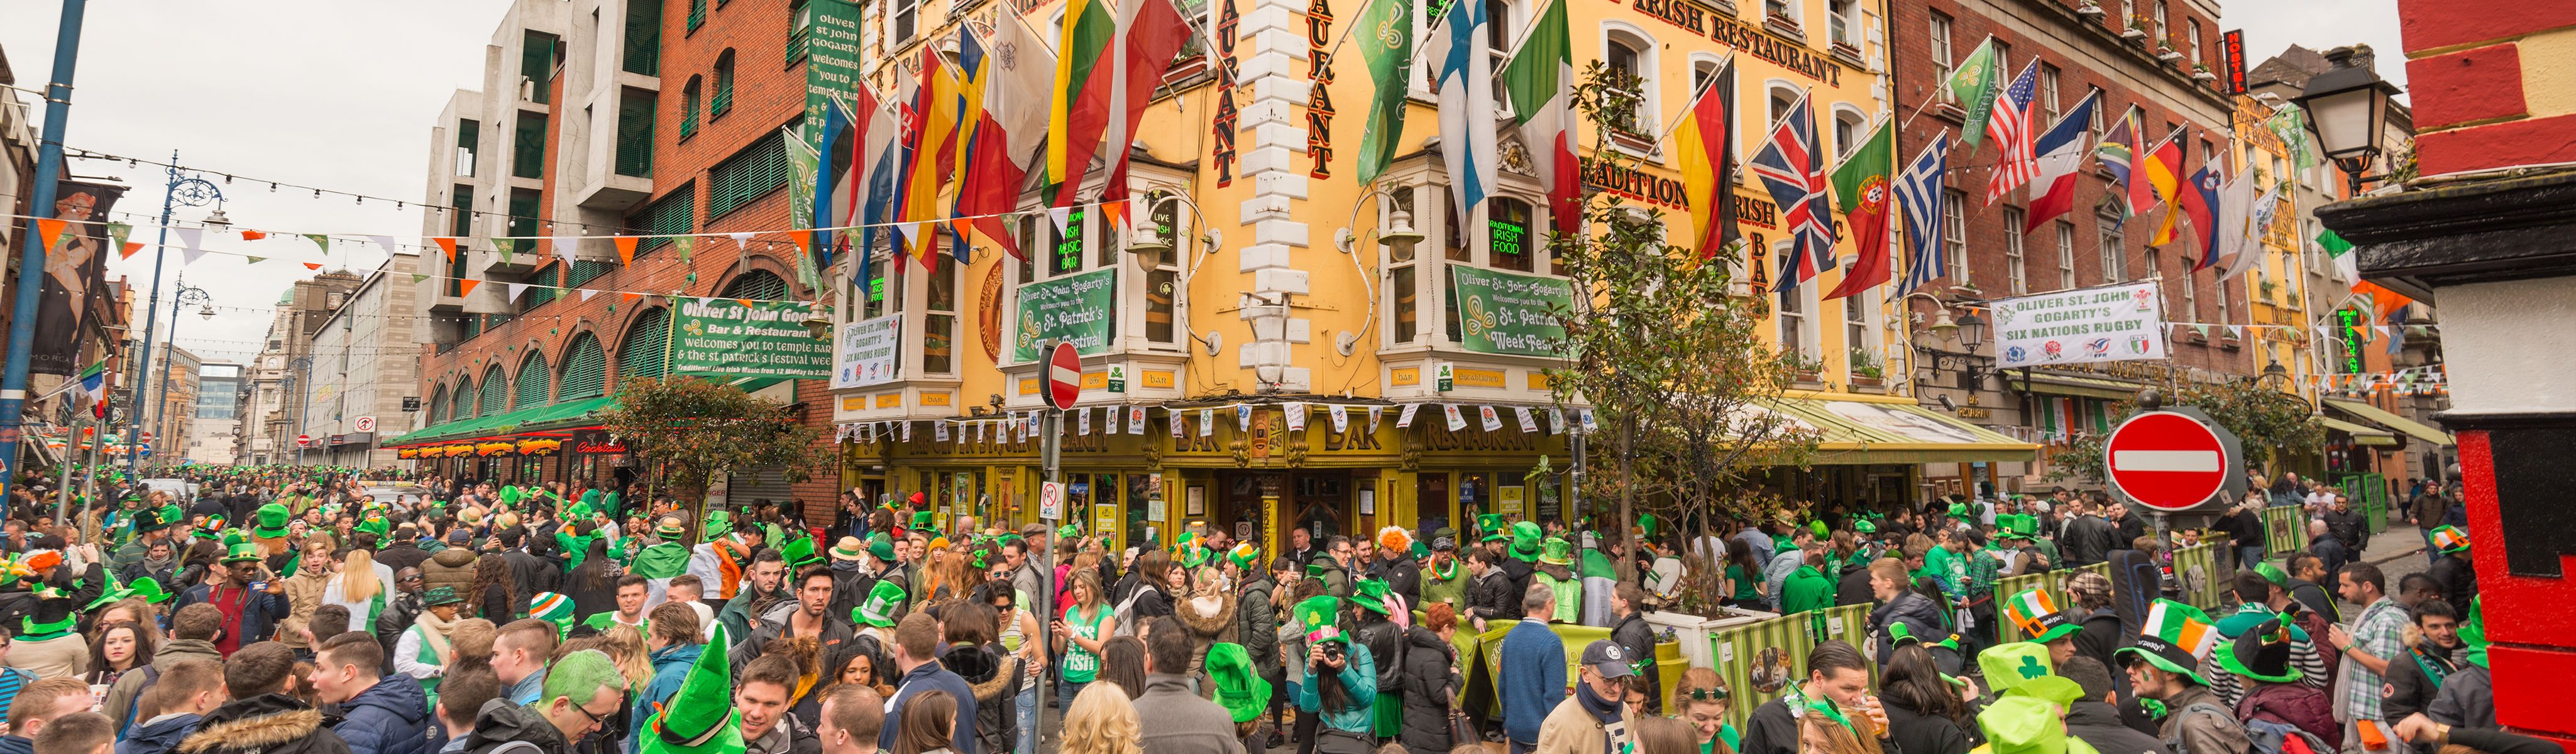 A Week in Ireland St. Patrick's Day EF Go Ahead Tours